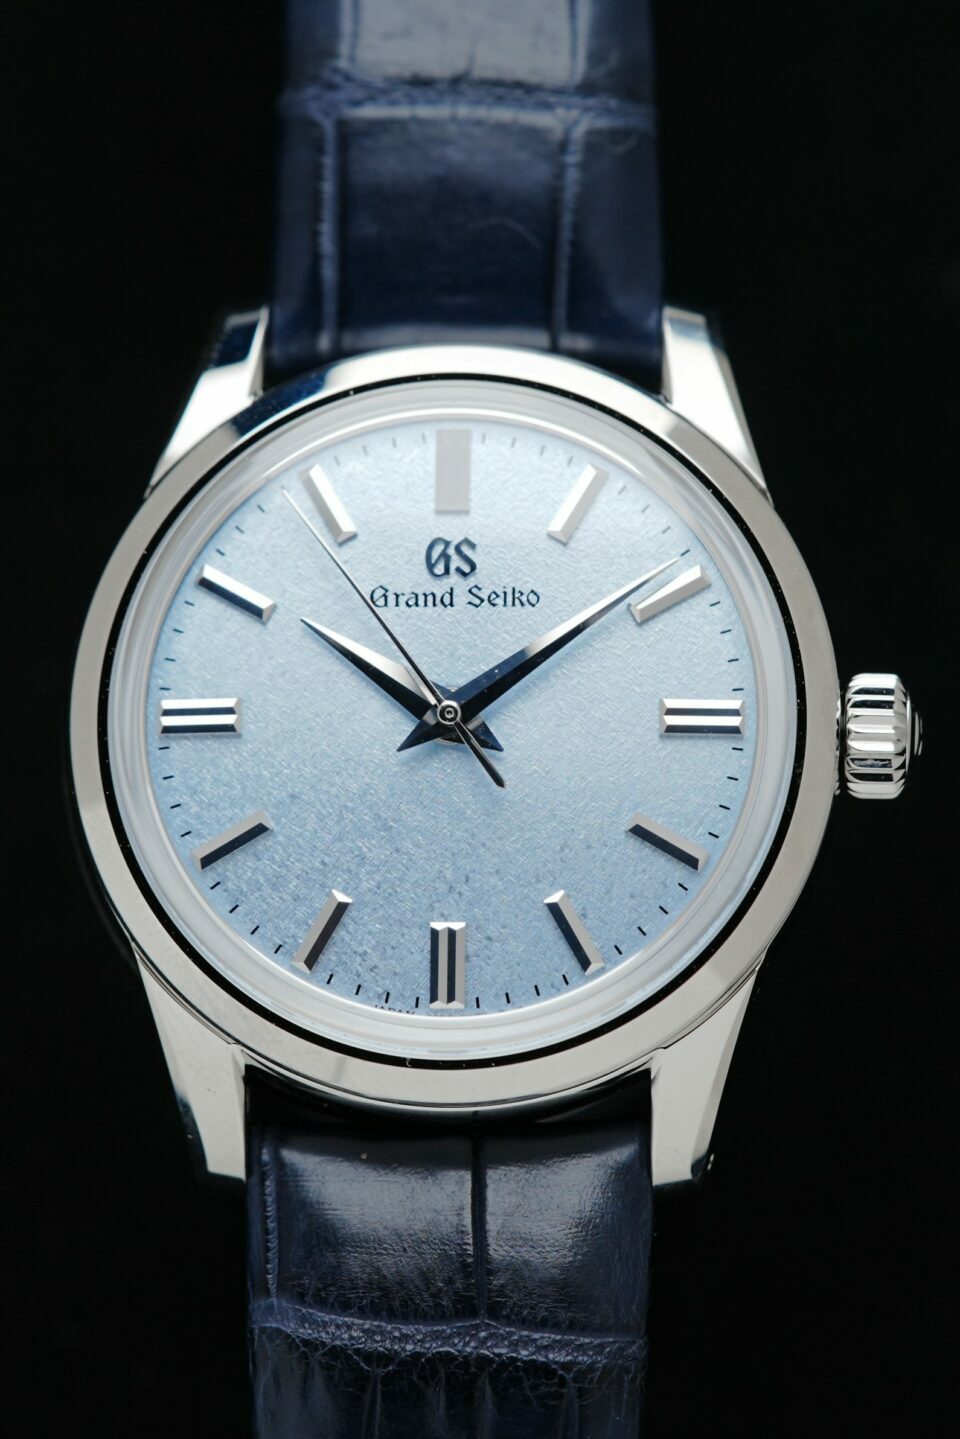 Elegant Grand Seiko watch with Ice Blue Dial featured under white lighting.